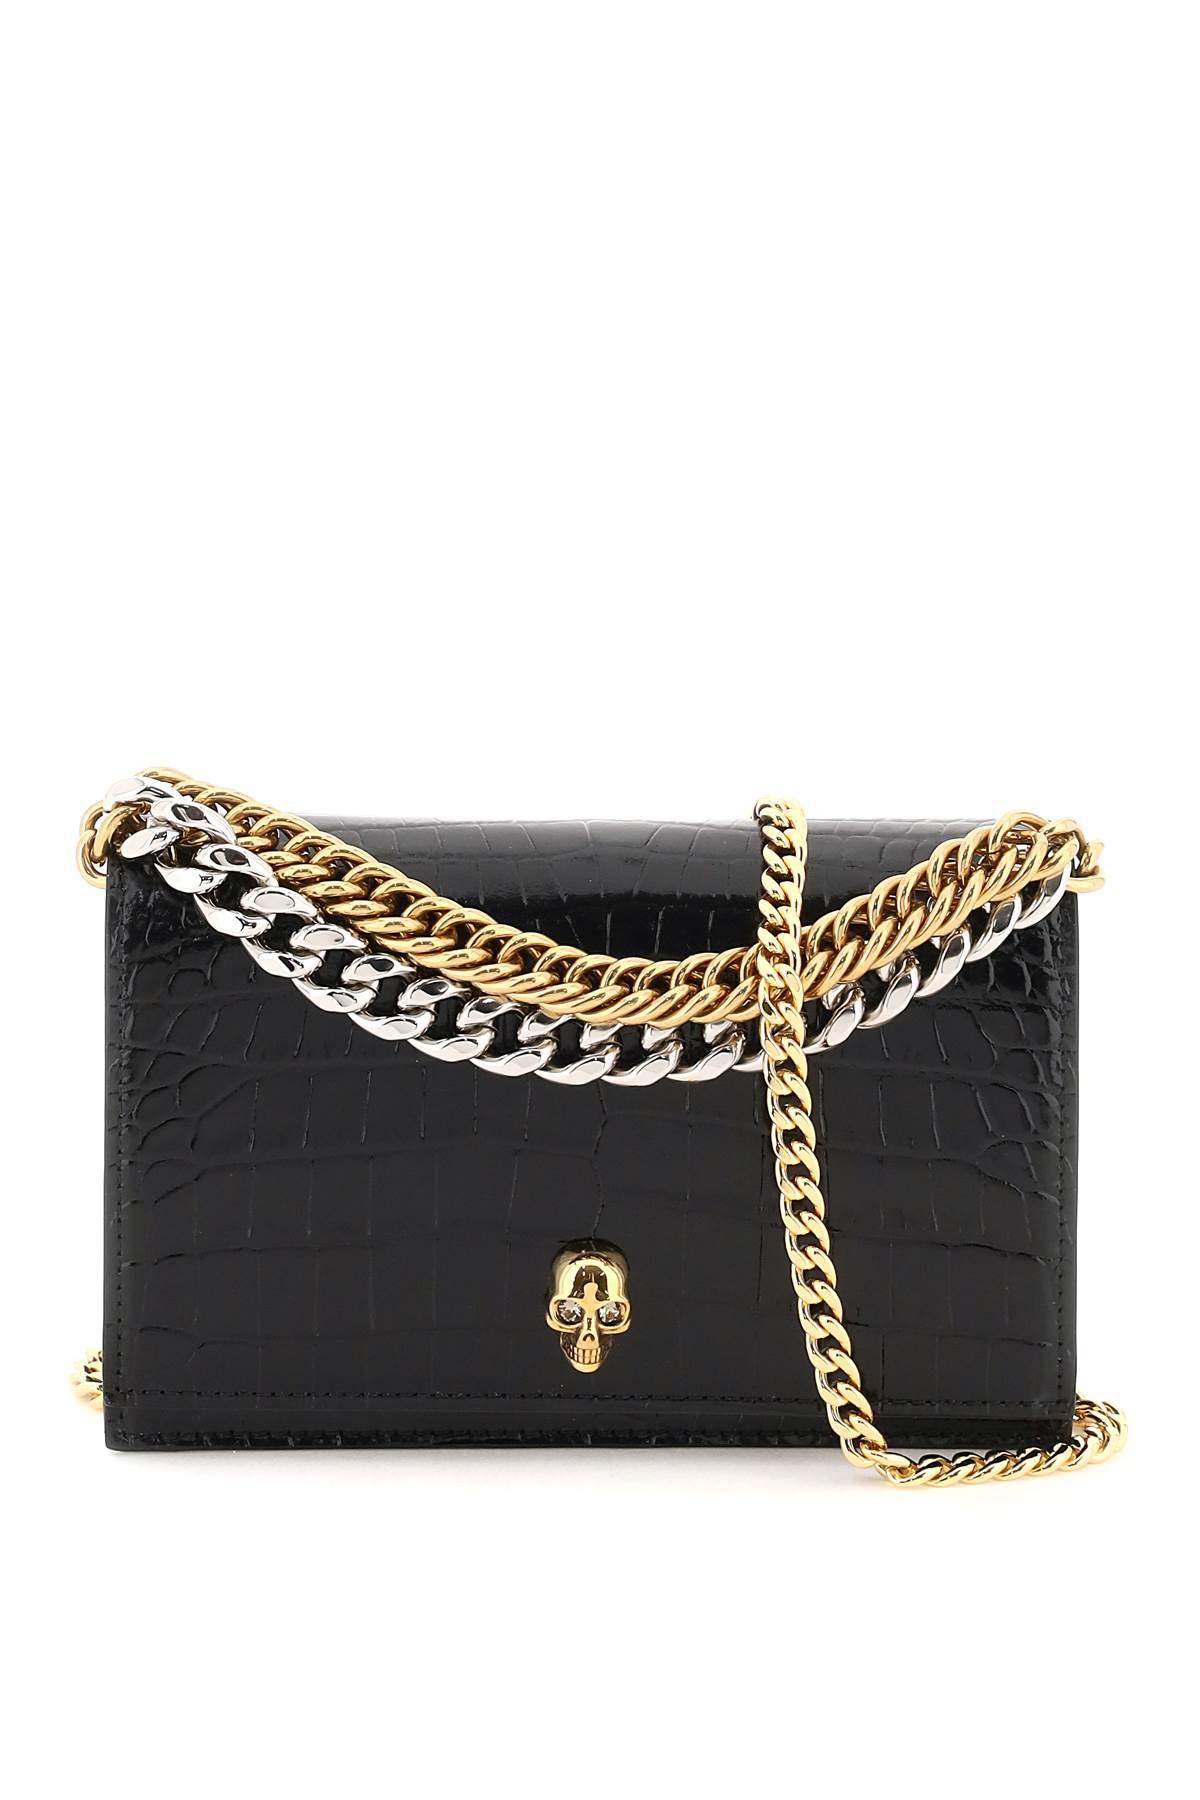 Alexander McQueen Small 'skull' Bag With Chains in Black | Lyst